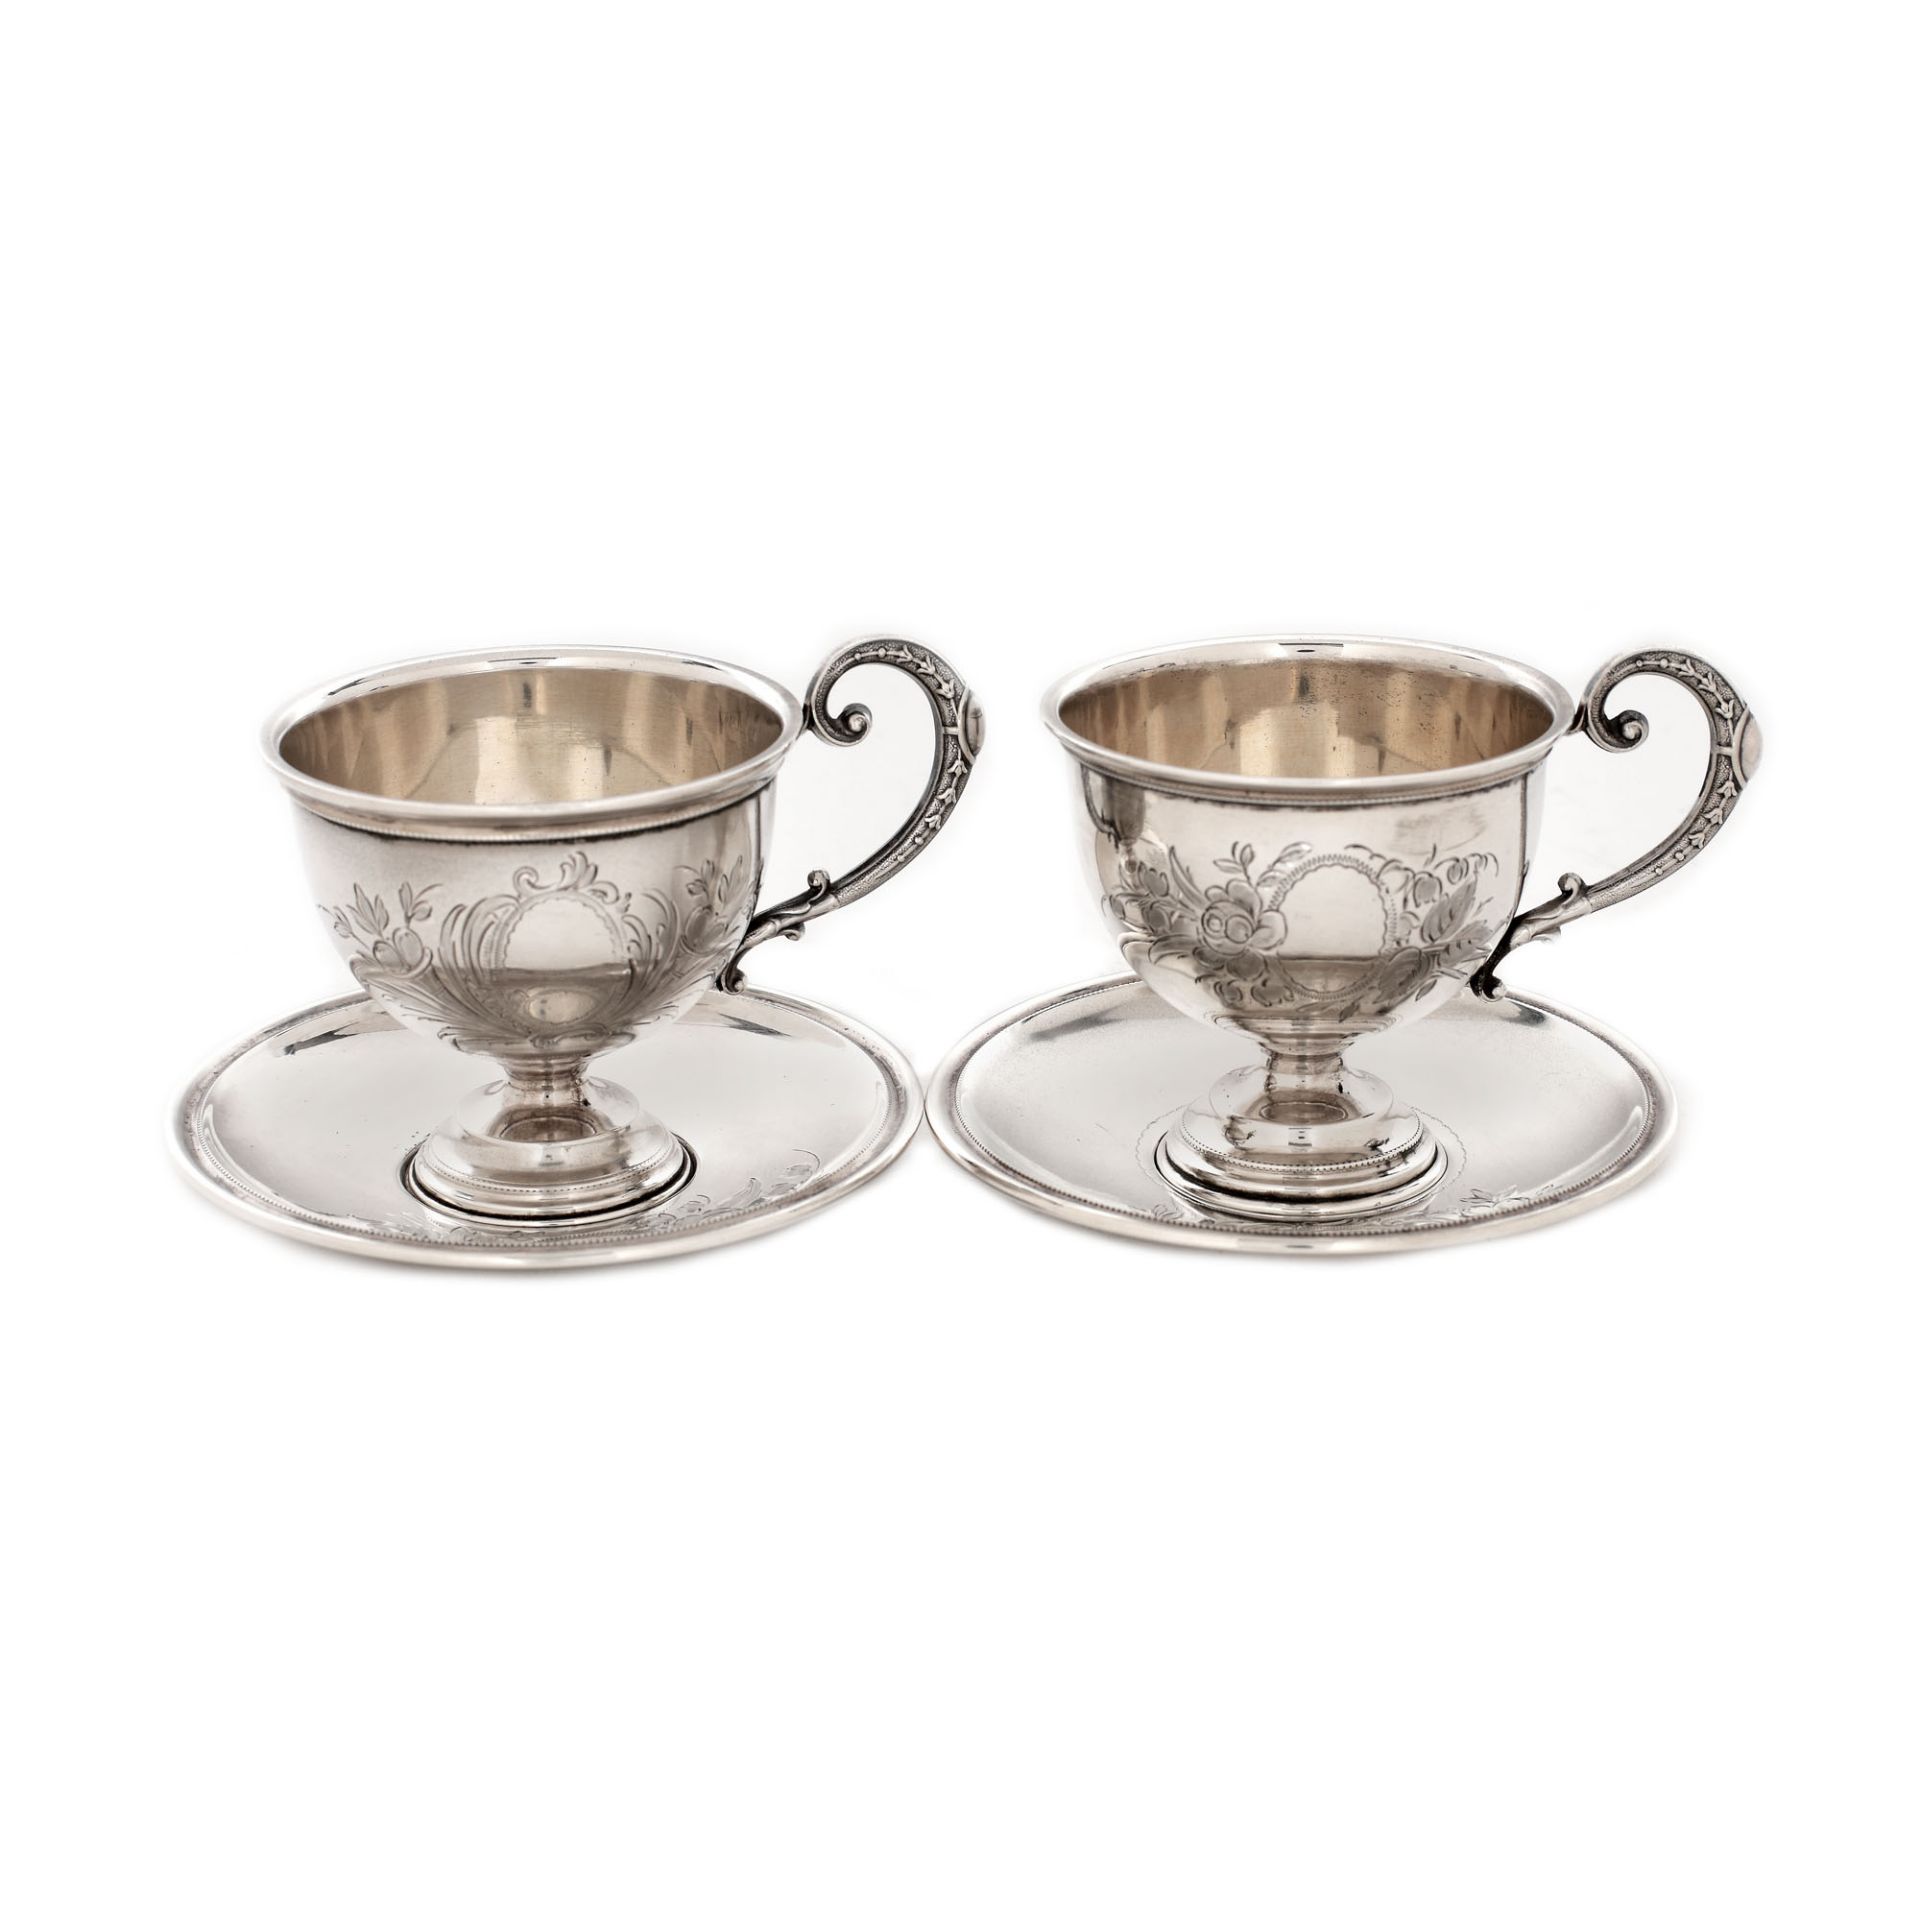 German workshop, Pair of cups with silver plates for tea, approx. 1900